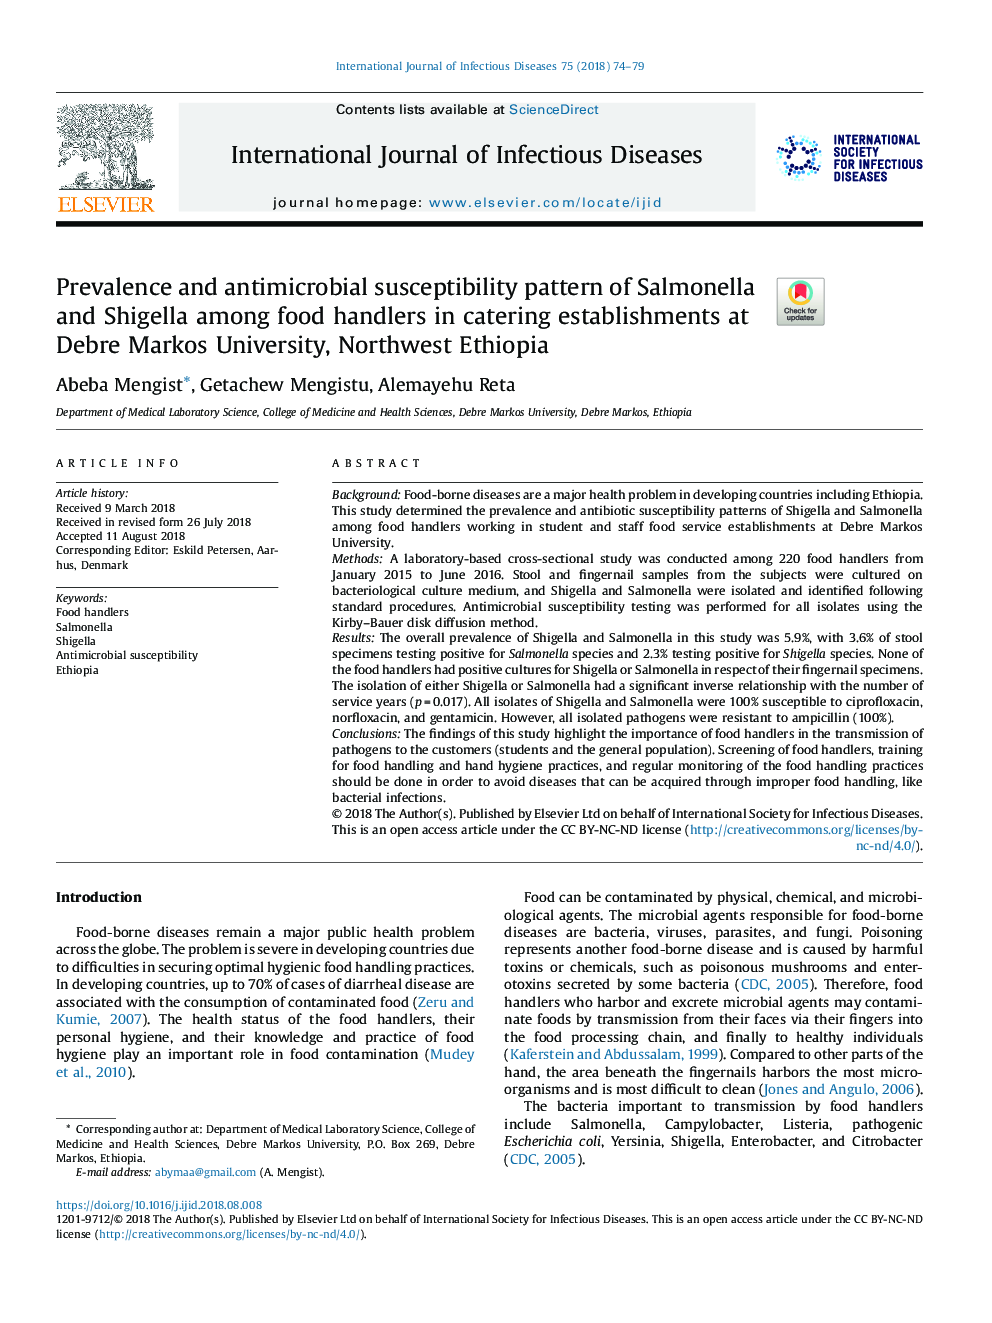 Prevalence and antimicrobial susceptibility pattern of Salmonella and Shigella among food handlers in catering establishments at Debre Markos University, Northwest Ethiopia